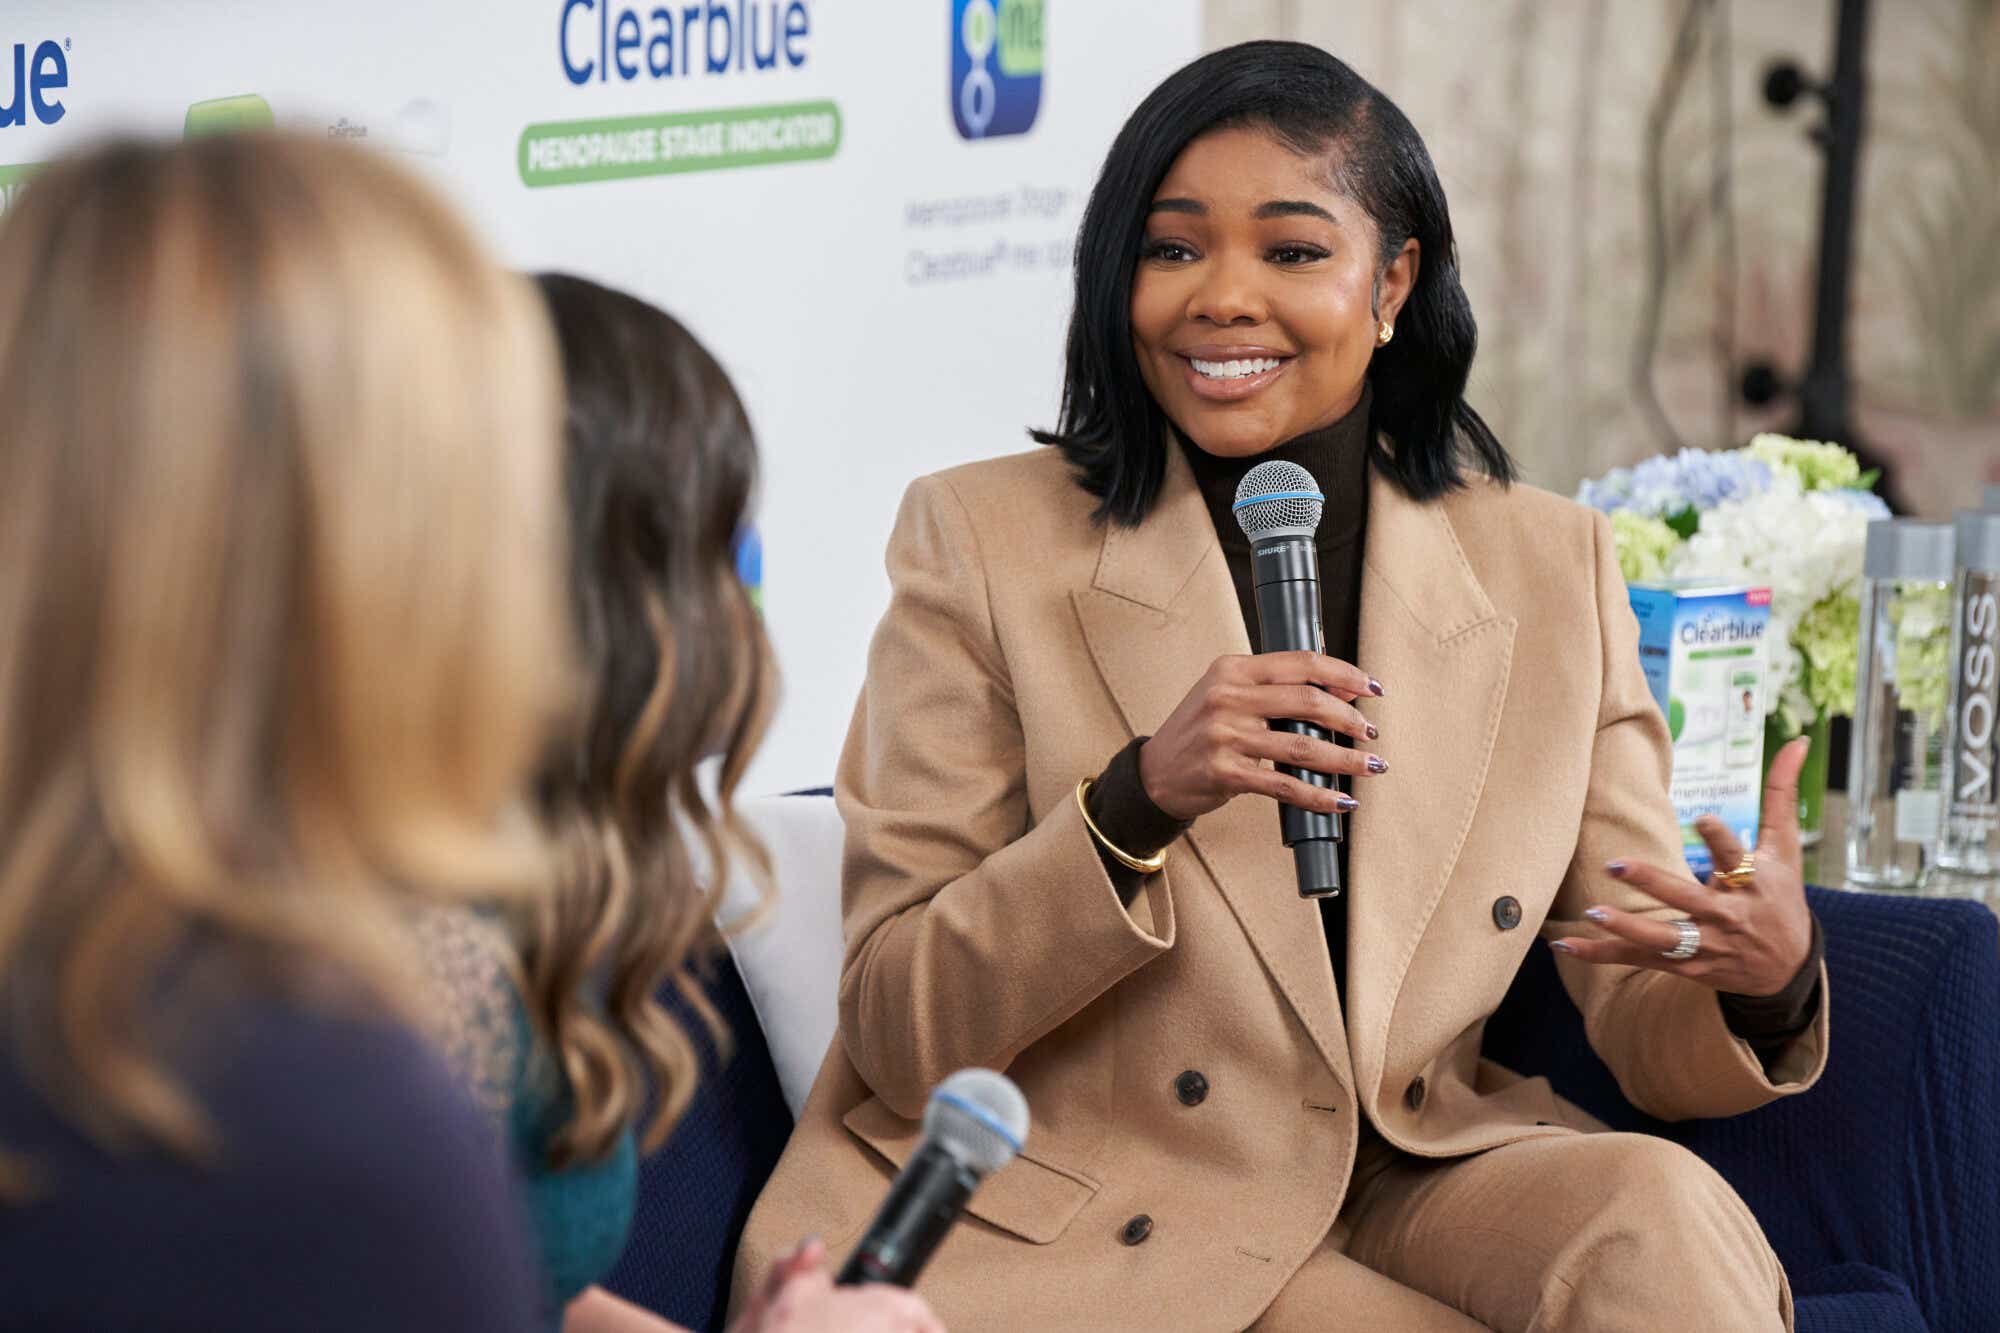 Gabrielle Union speaking at ClearBlue event. Courtesy of Brian Thomas